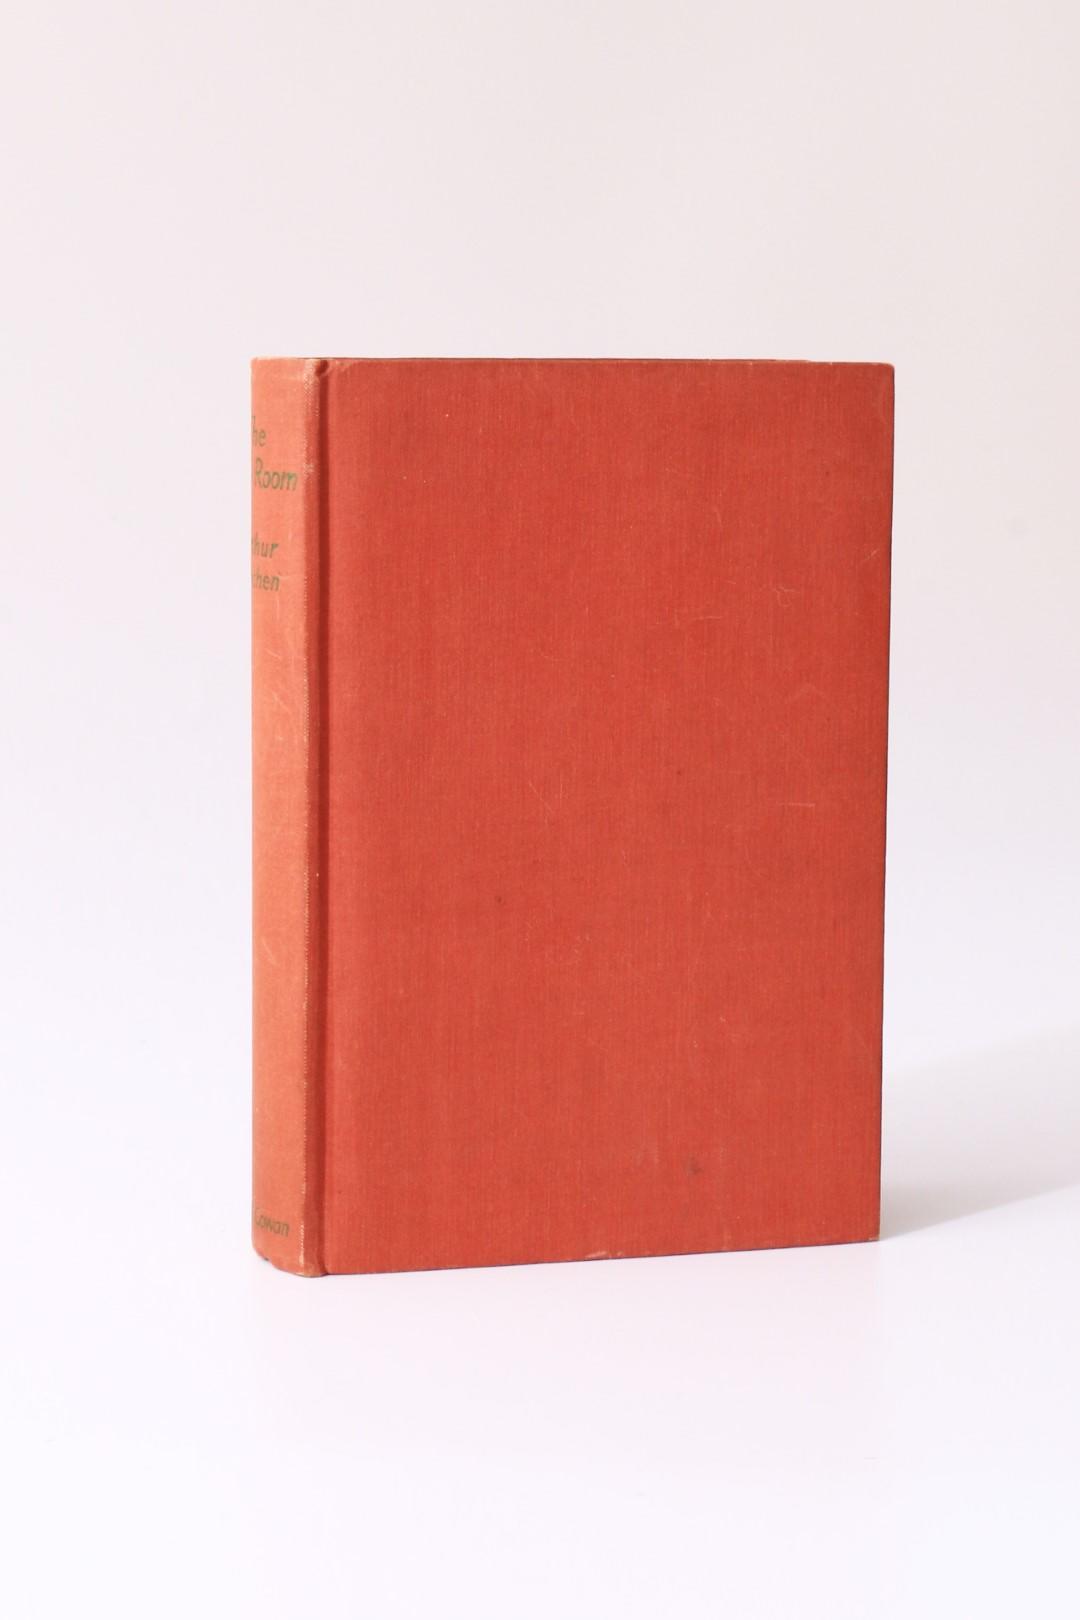 Arthur Machen - The Cosy Room and other stories - Rich & Cowan, 1936, First Edition.